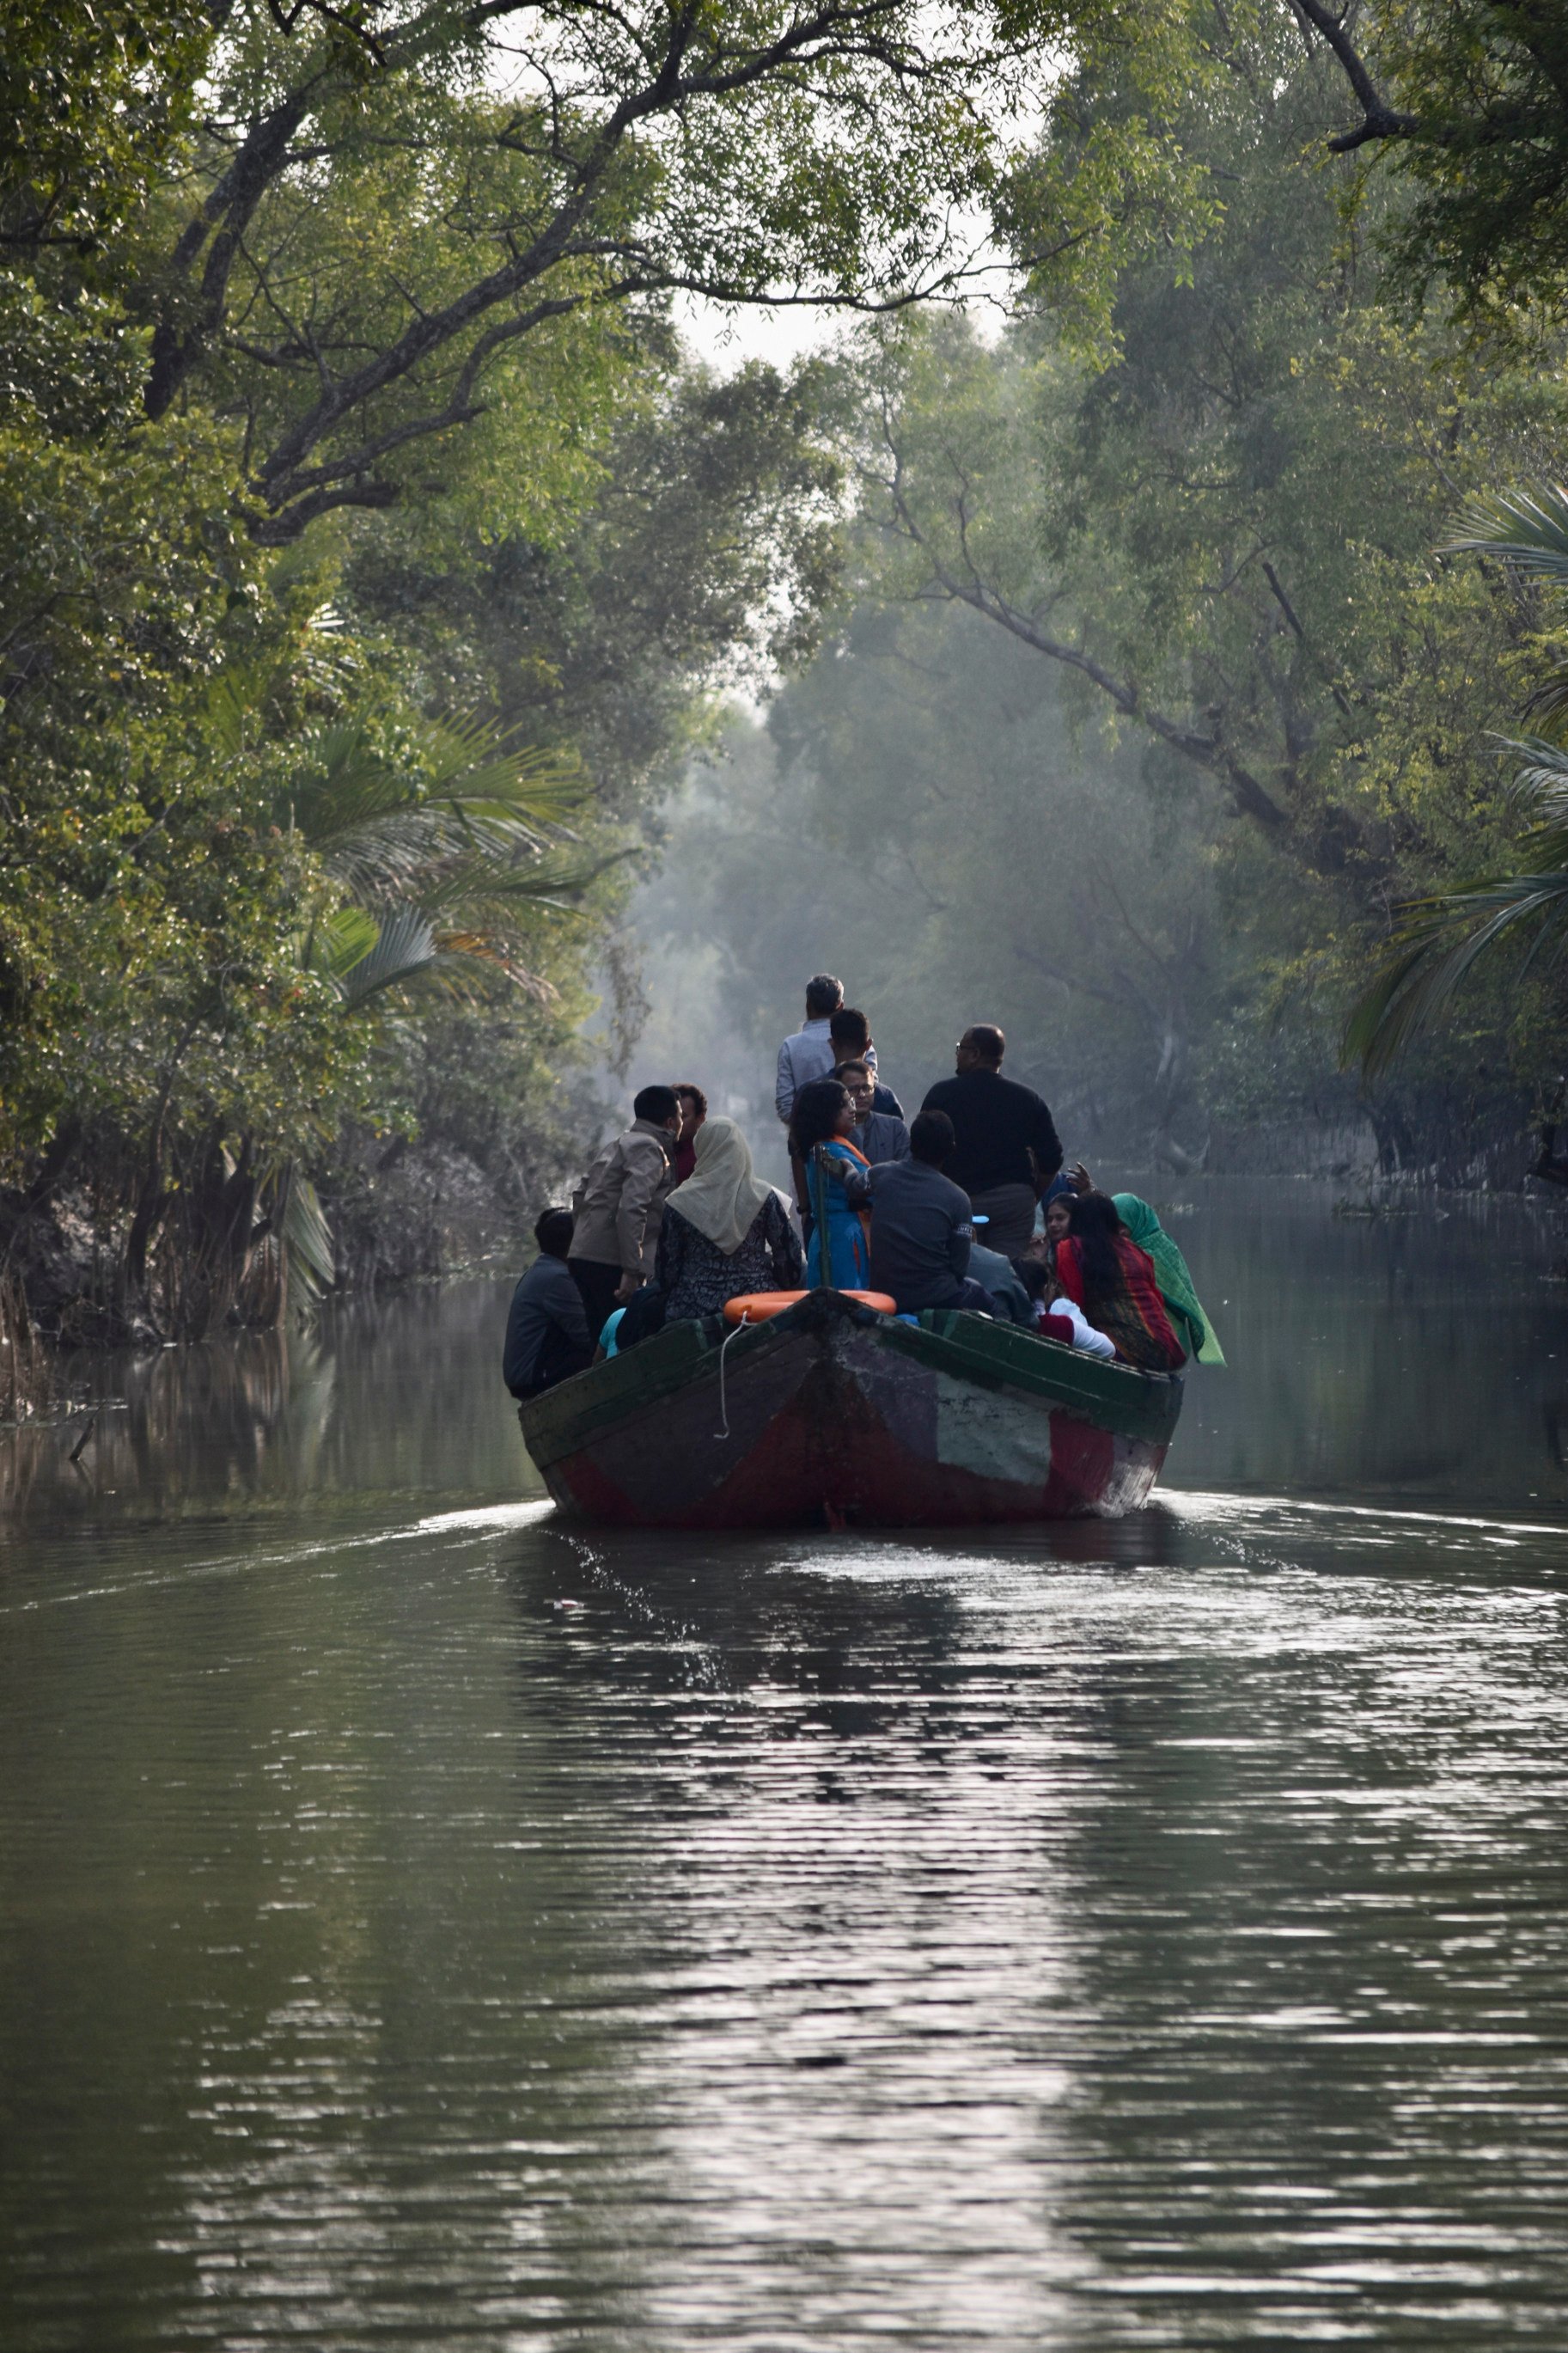 Tourists on a wildlife cruise of the Bangladeshi Sundarbans take smaller wooden boats that give access to the area’s narrow waterways, offering a glimpse into the depths of the mangrove forest. Photo: Victoria Burrows